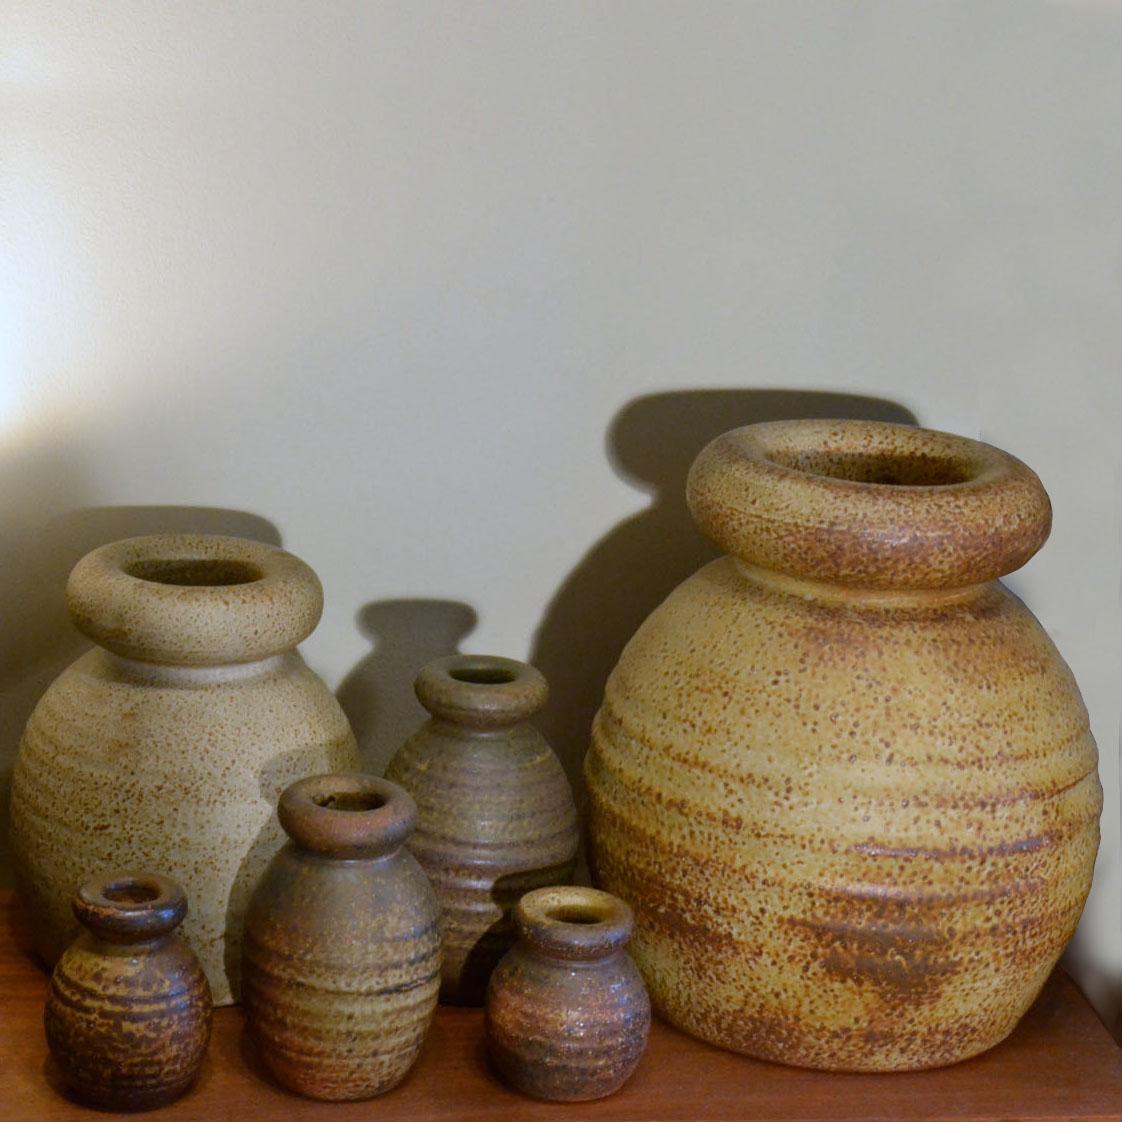 Group of Bulbous Studio Ceramic Vases with Rolled in Earth Tones by Piet Knepper In Excellent Condition For Sale In London, GB